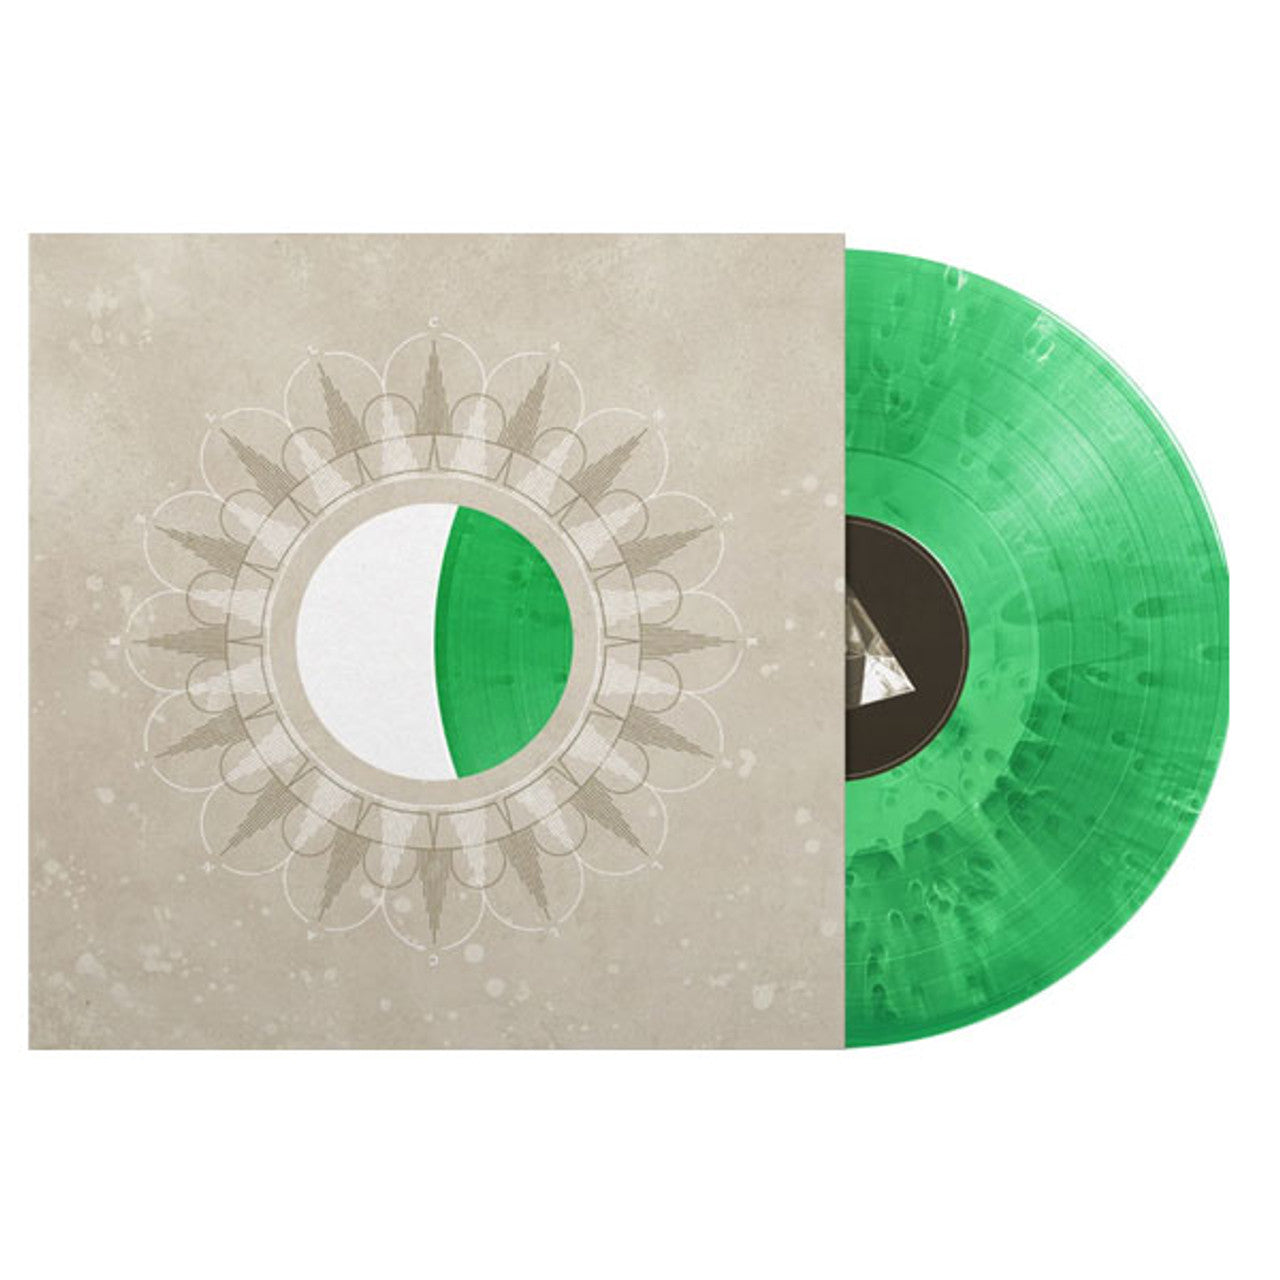 Jerry Cantrell - Prism Of Doubt [Kelly Green Splatter Vinyl] (Glow In The Dark Packaging with Two-Sided Art)